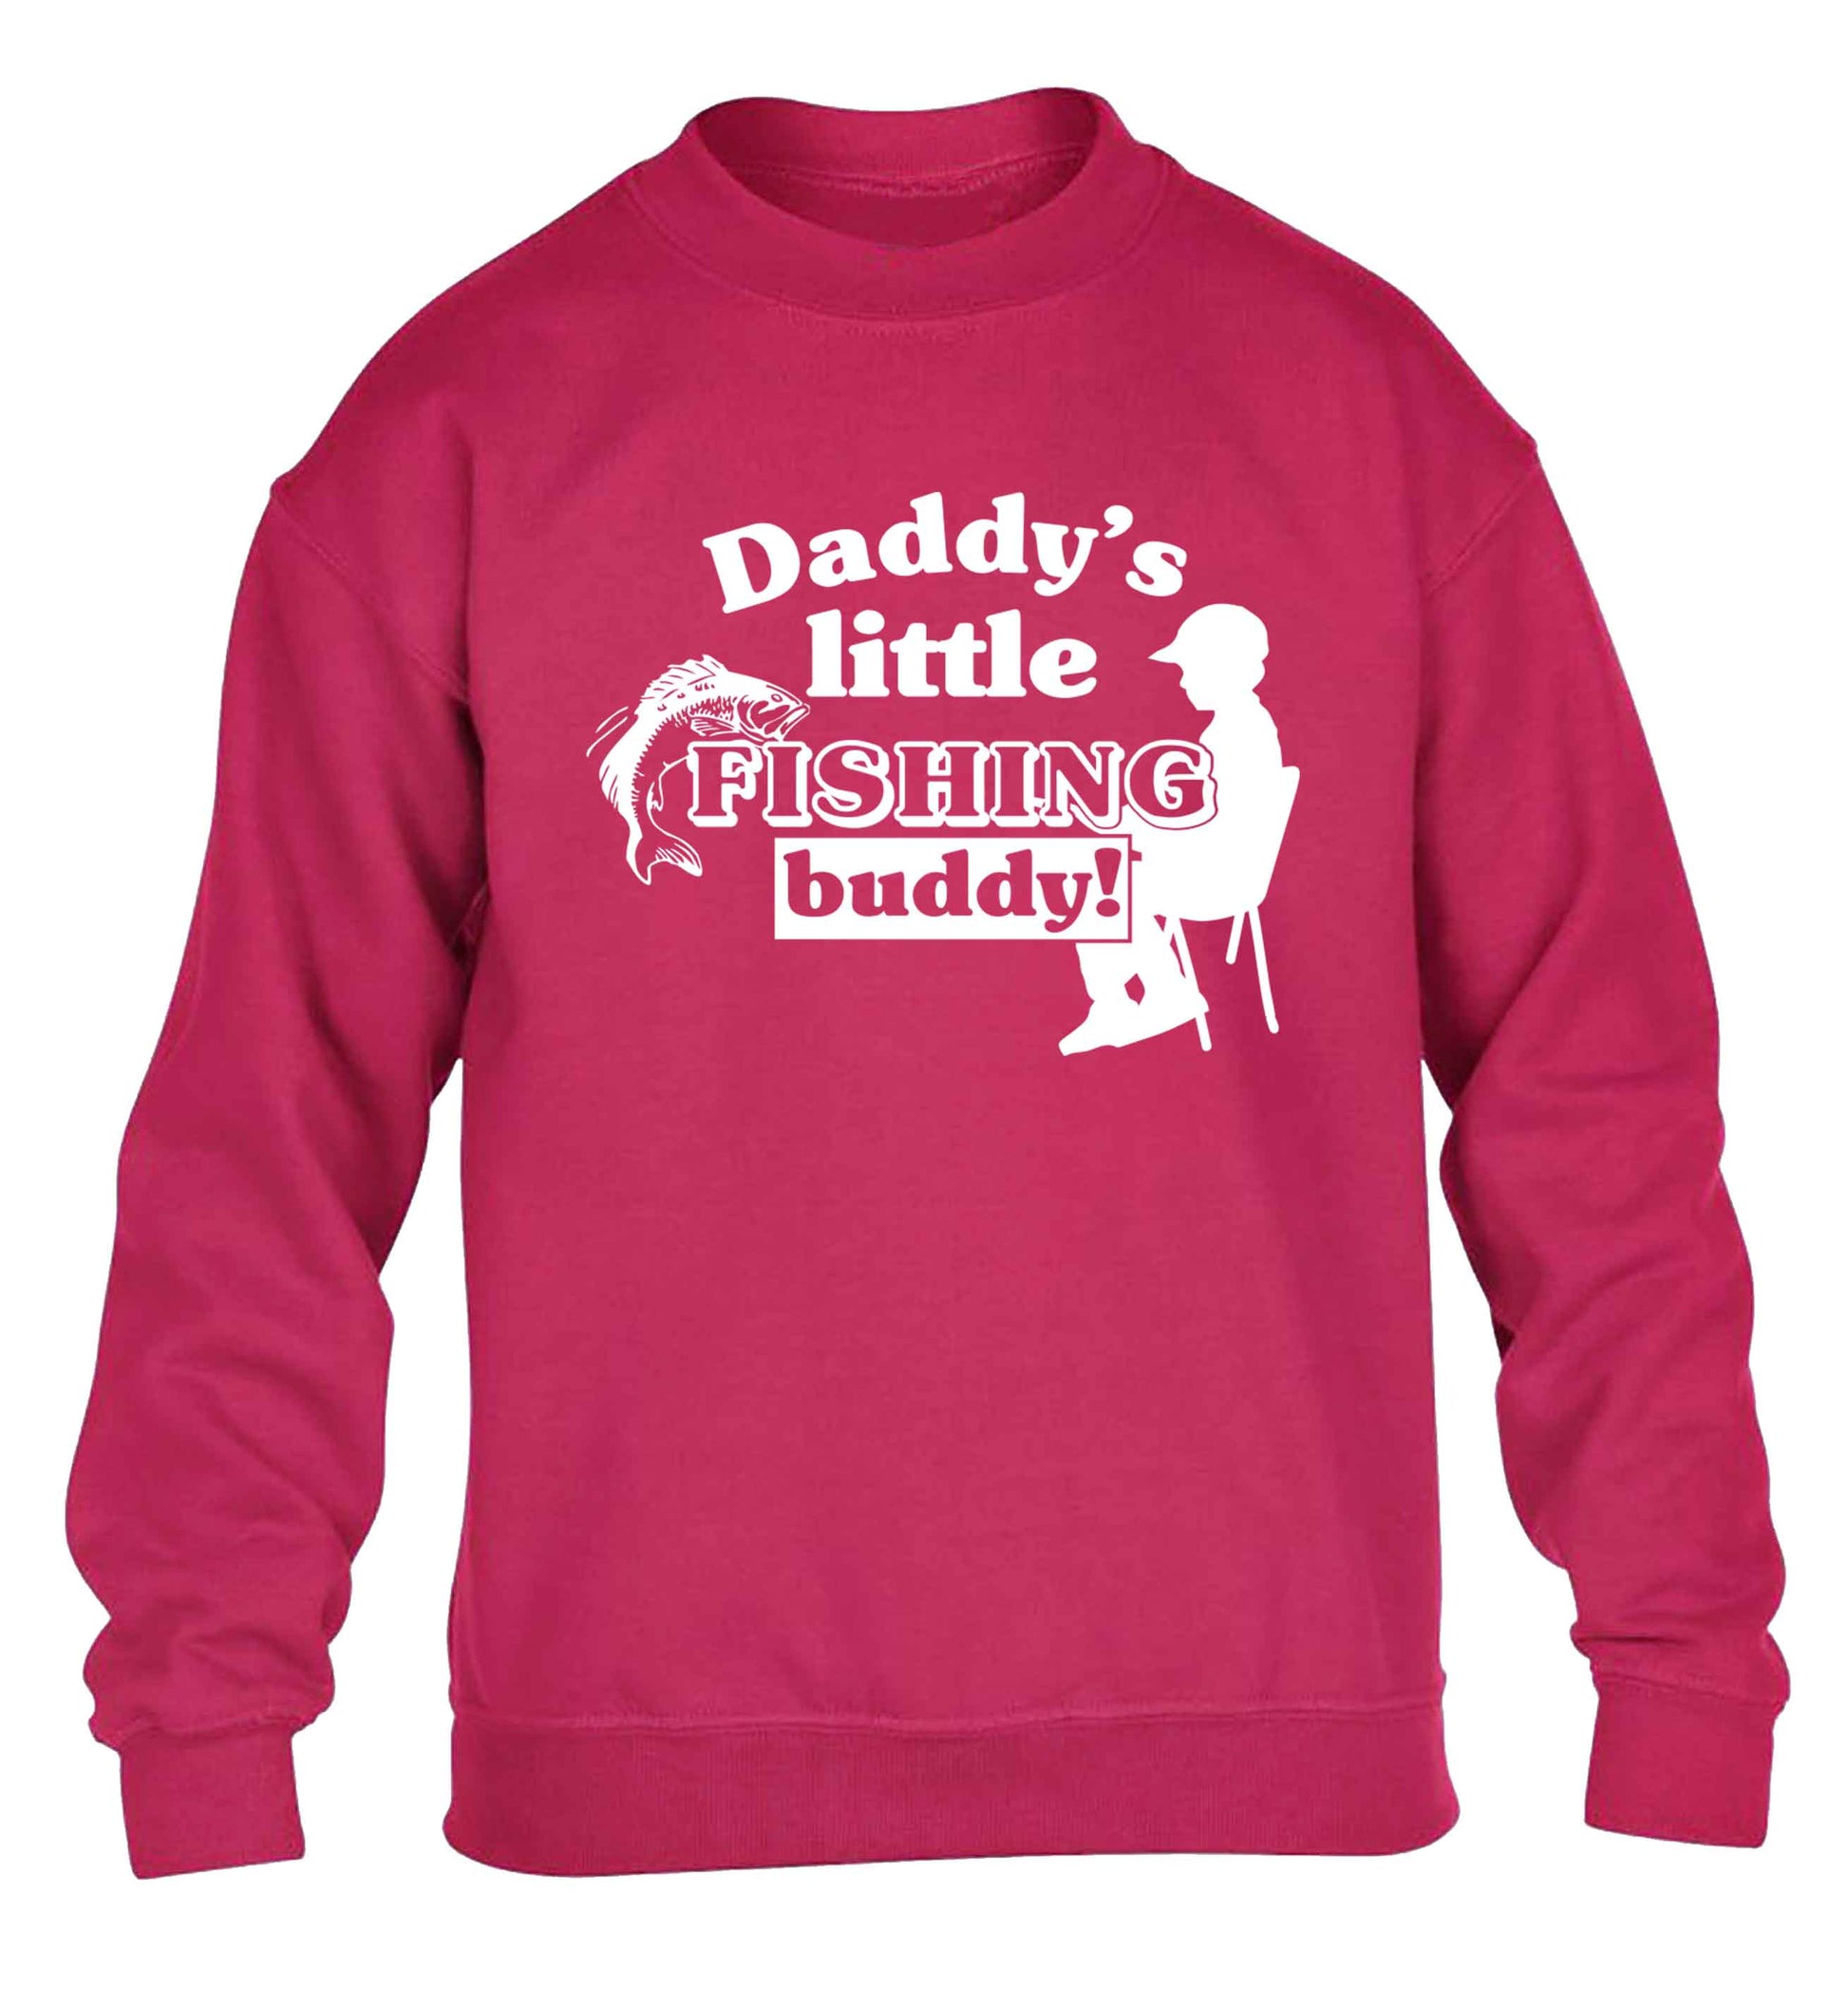 Daddy's little fishing buddy children's pink sweater 12-13 Years